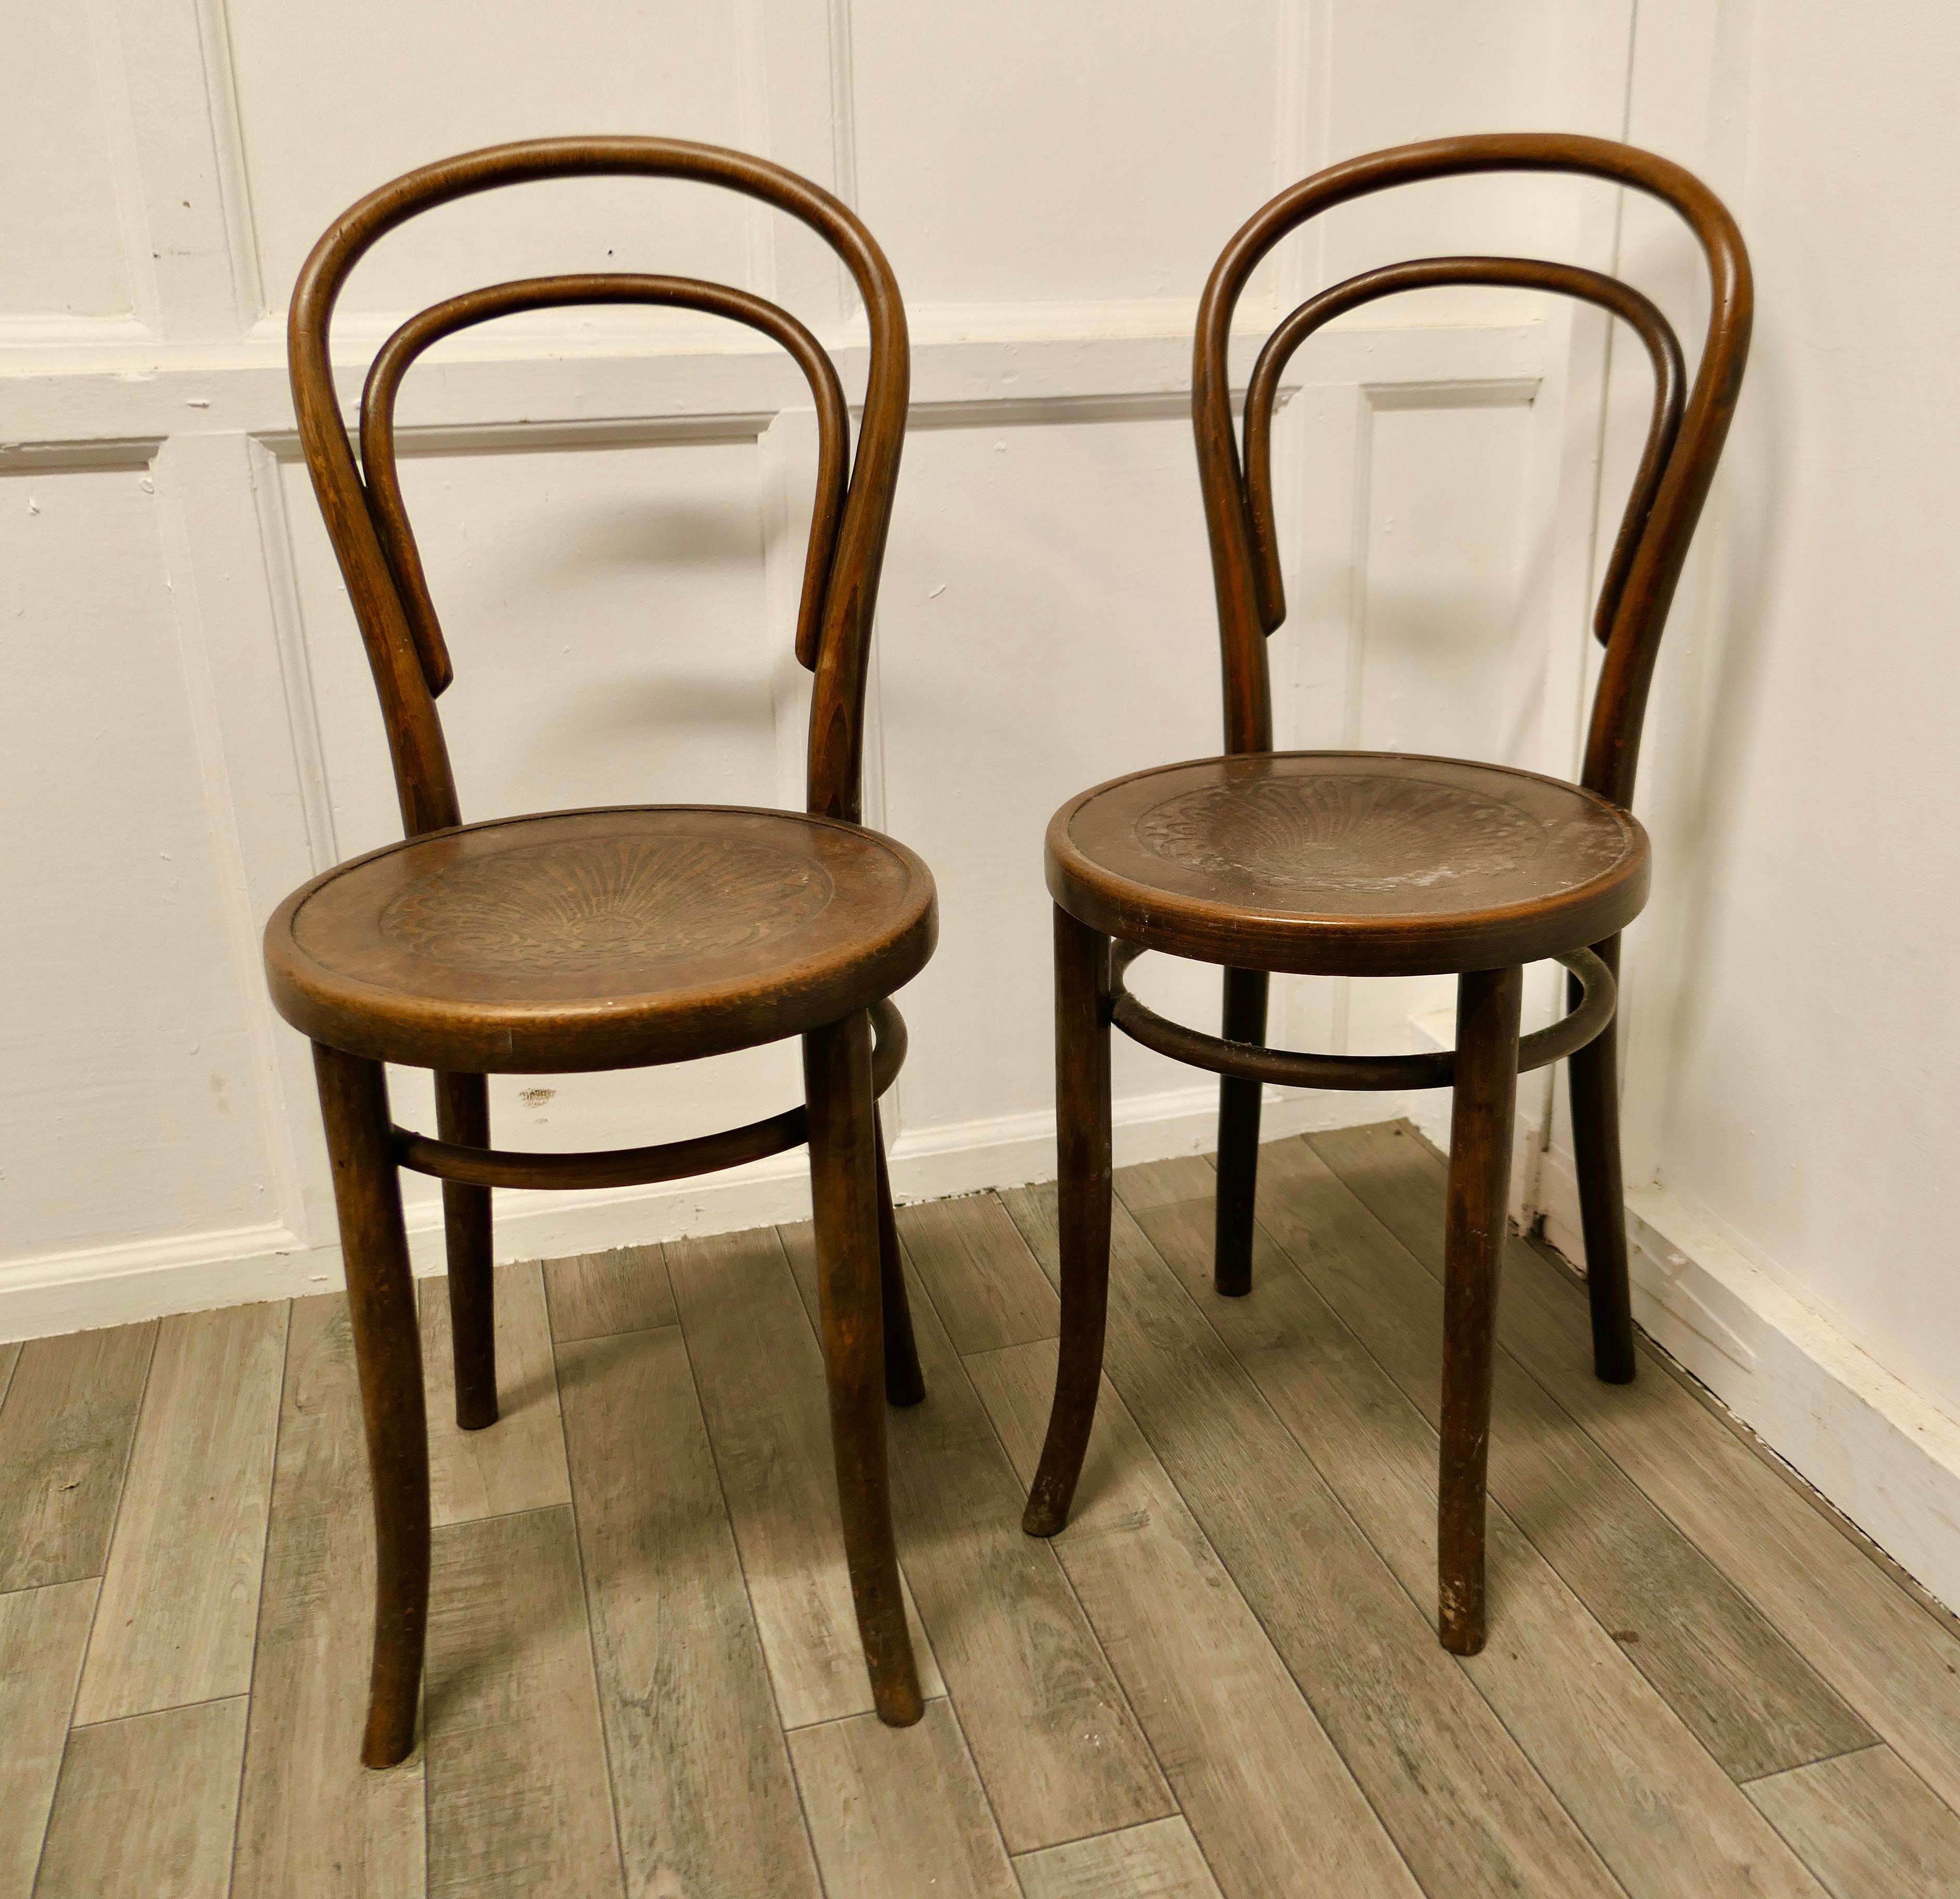 Pair of Thonet Bistro Bentwood chairs 

A Good sturdy pair of Café Chairs, traditionally this type of chair was used in Bistros and Brassieres but they would make just as good kitchen chairs 
The chairs have original patterned pressed plywood